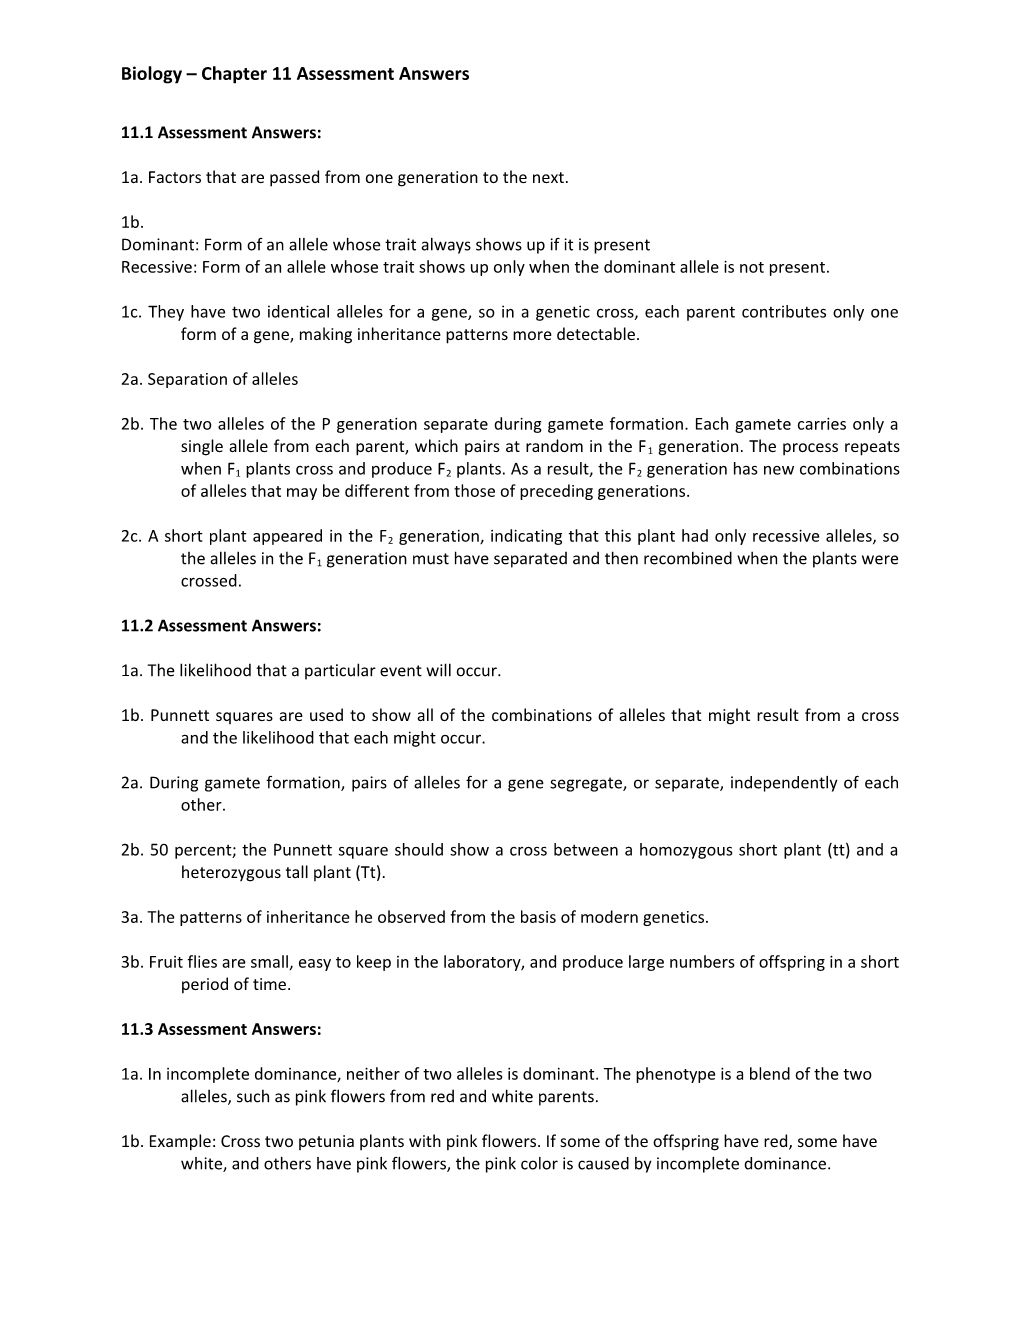 Biology Chapter 11 Assessment Answers